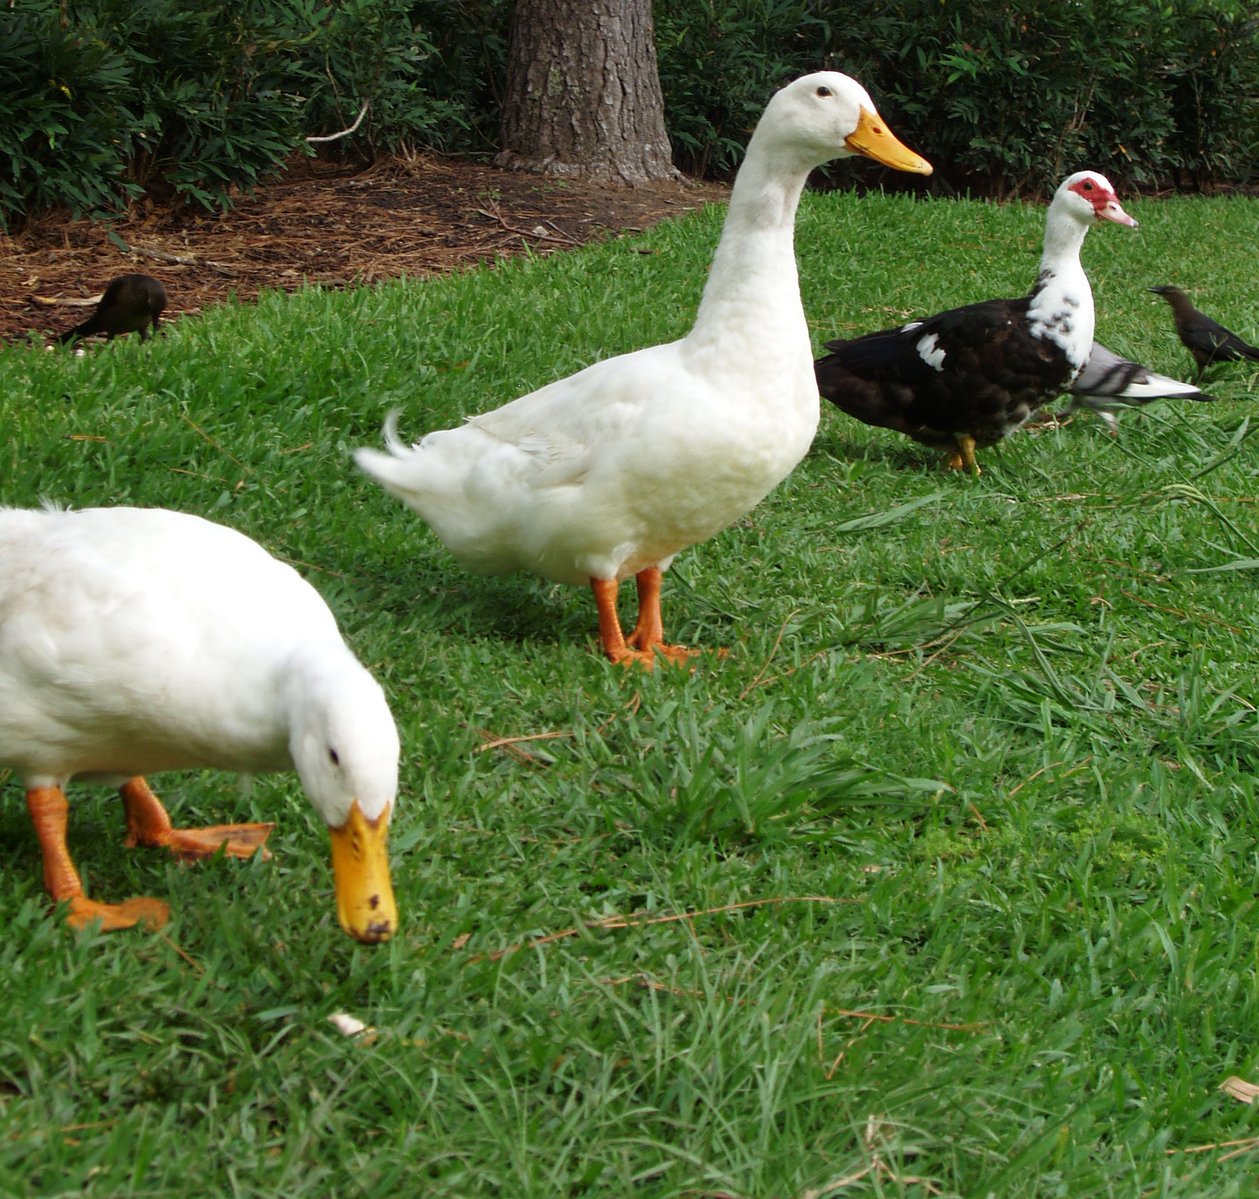 a number of ducks near one another on a grassy field